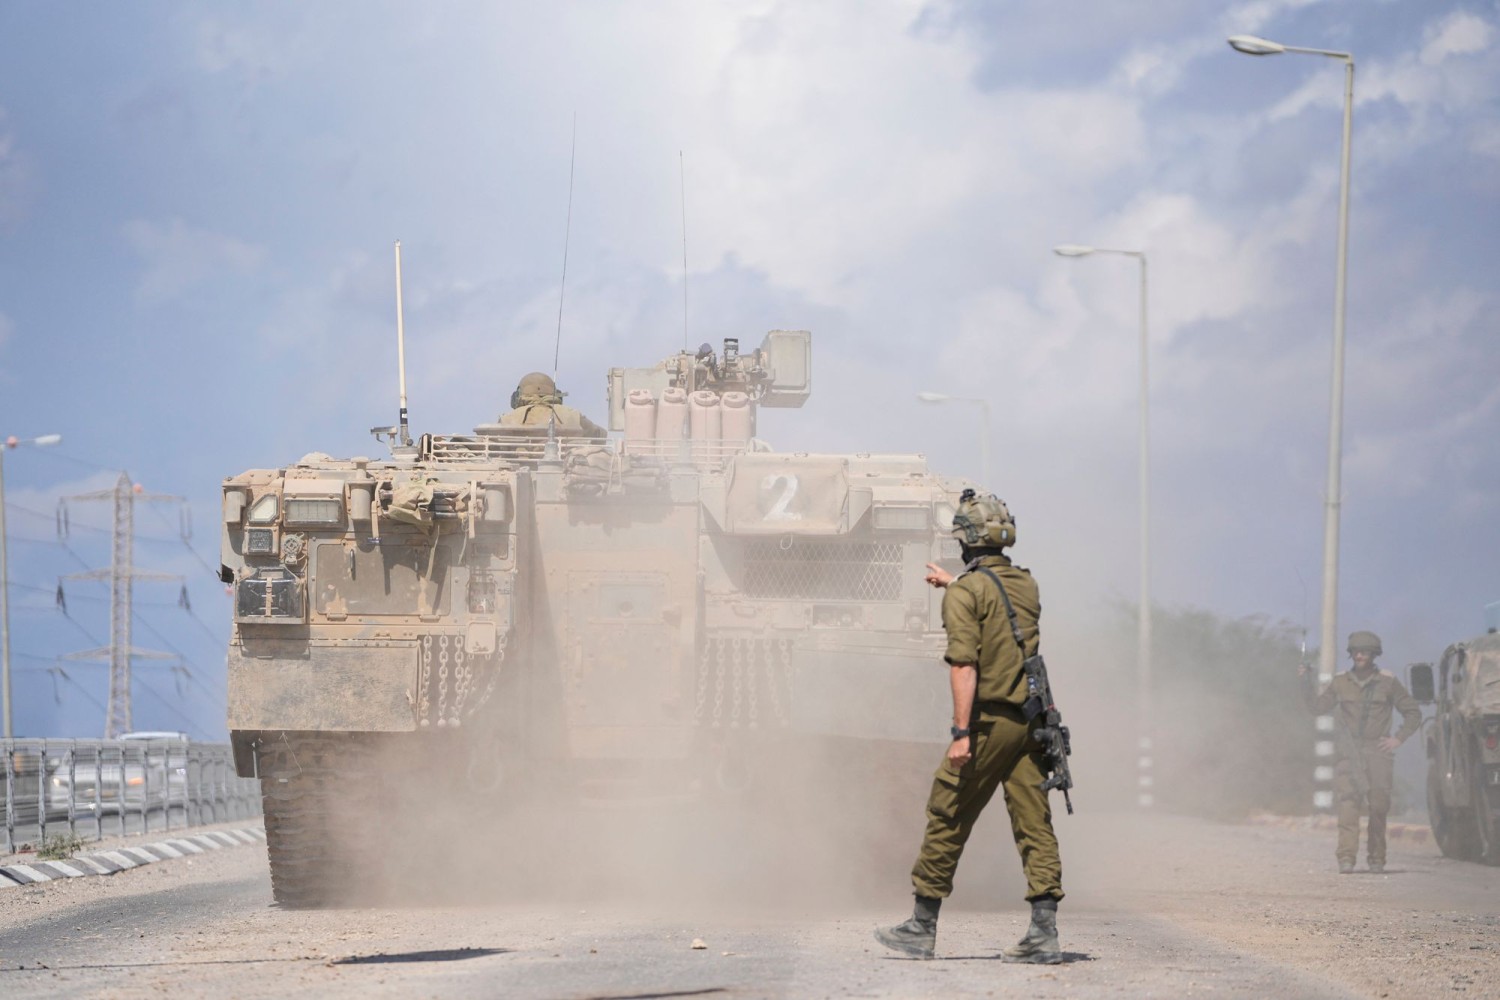 An Israeli armored personnel carrier heads toward the Gaza border. OHAD ZWIGENBERG/ASSOCIATED PRESS